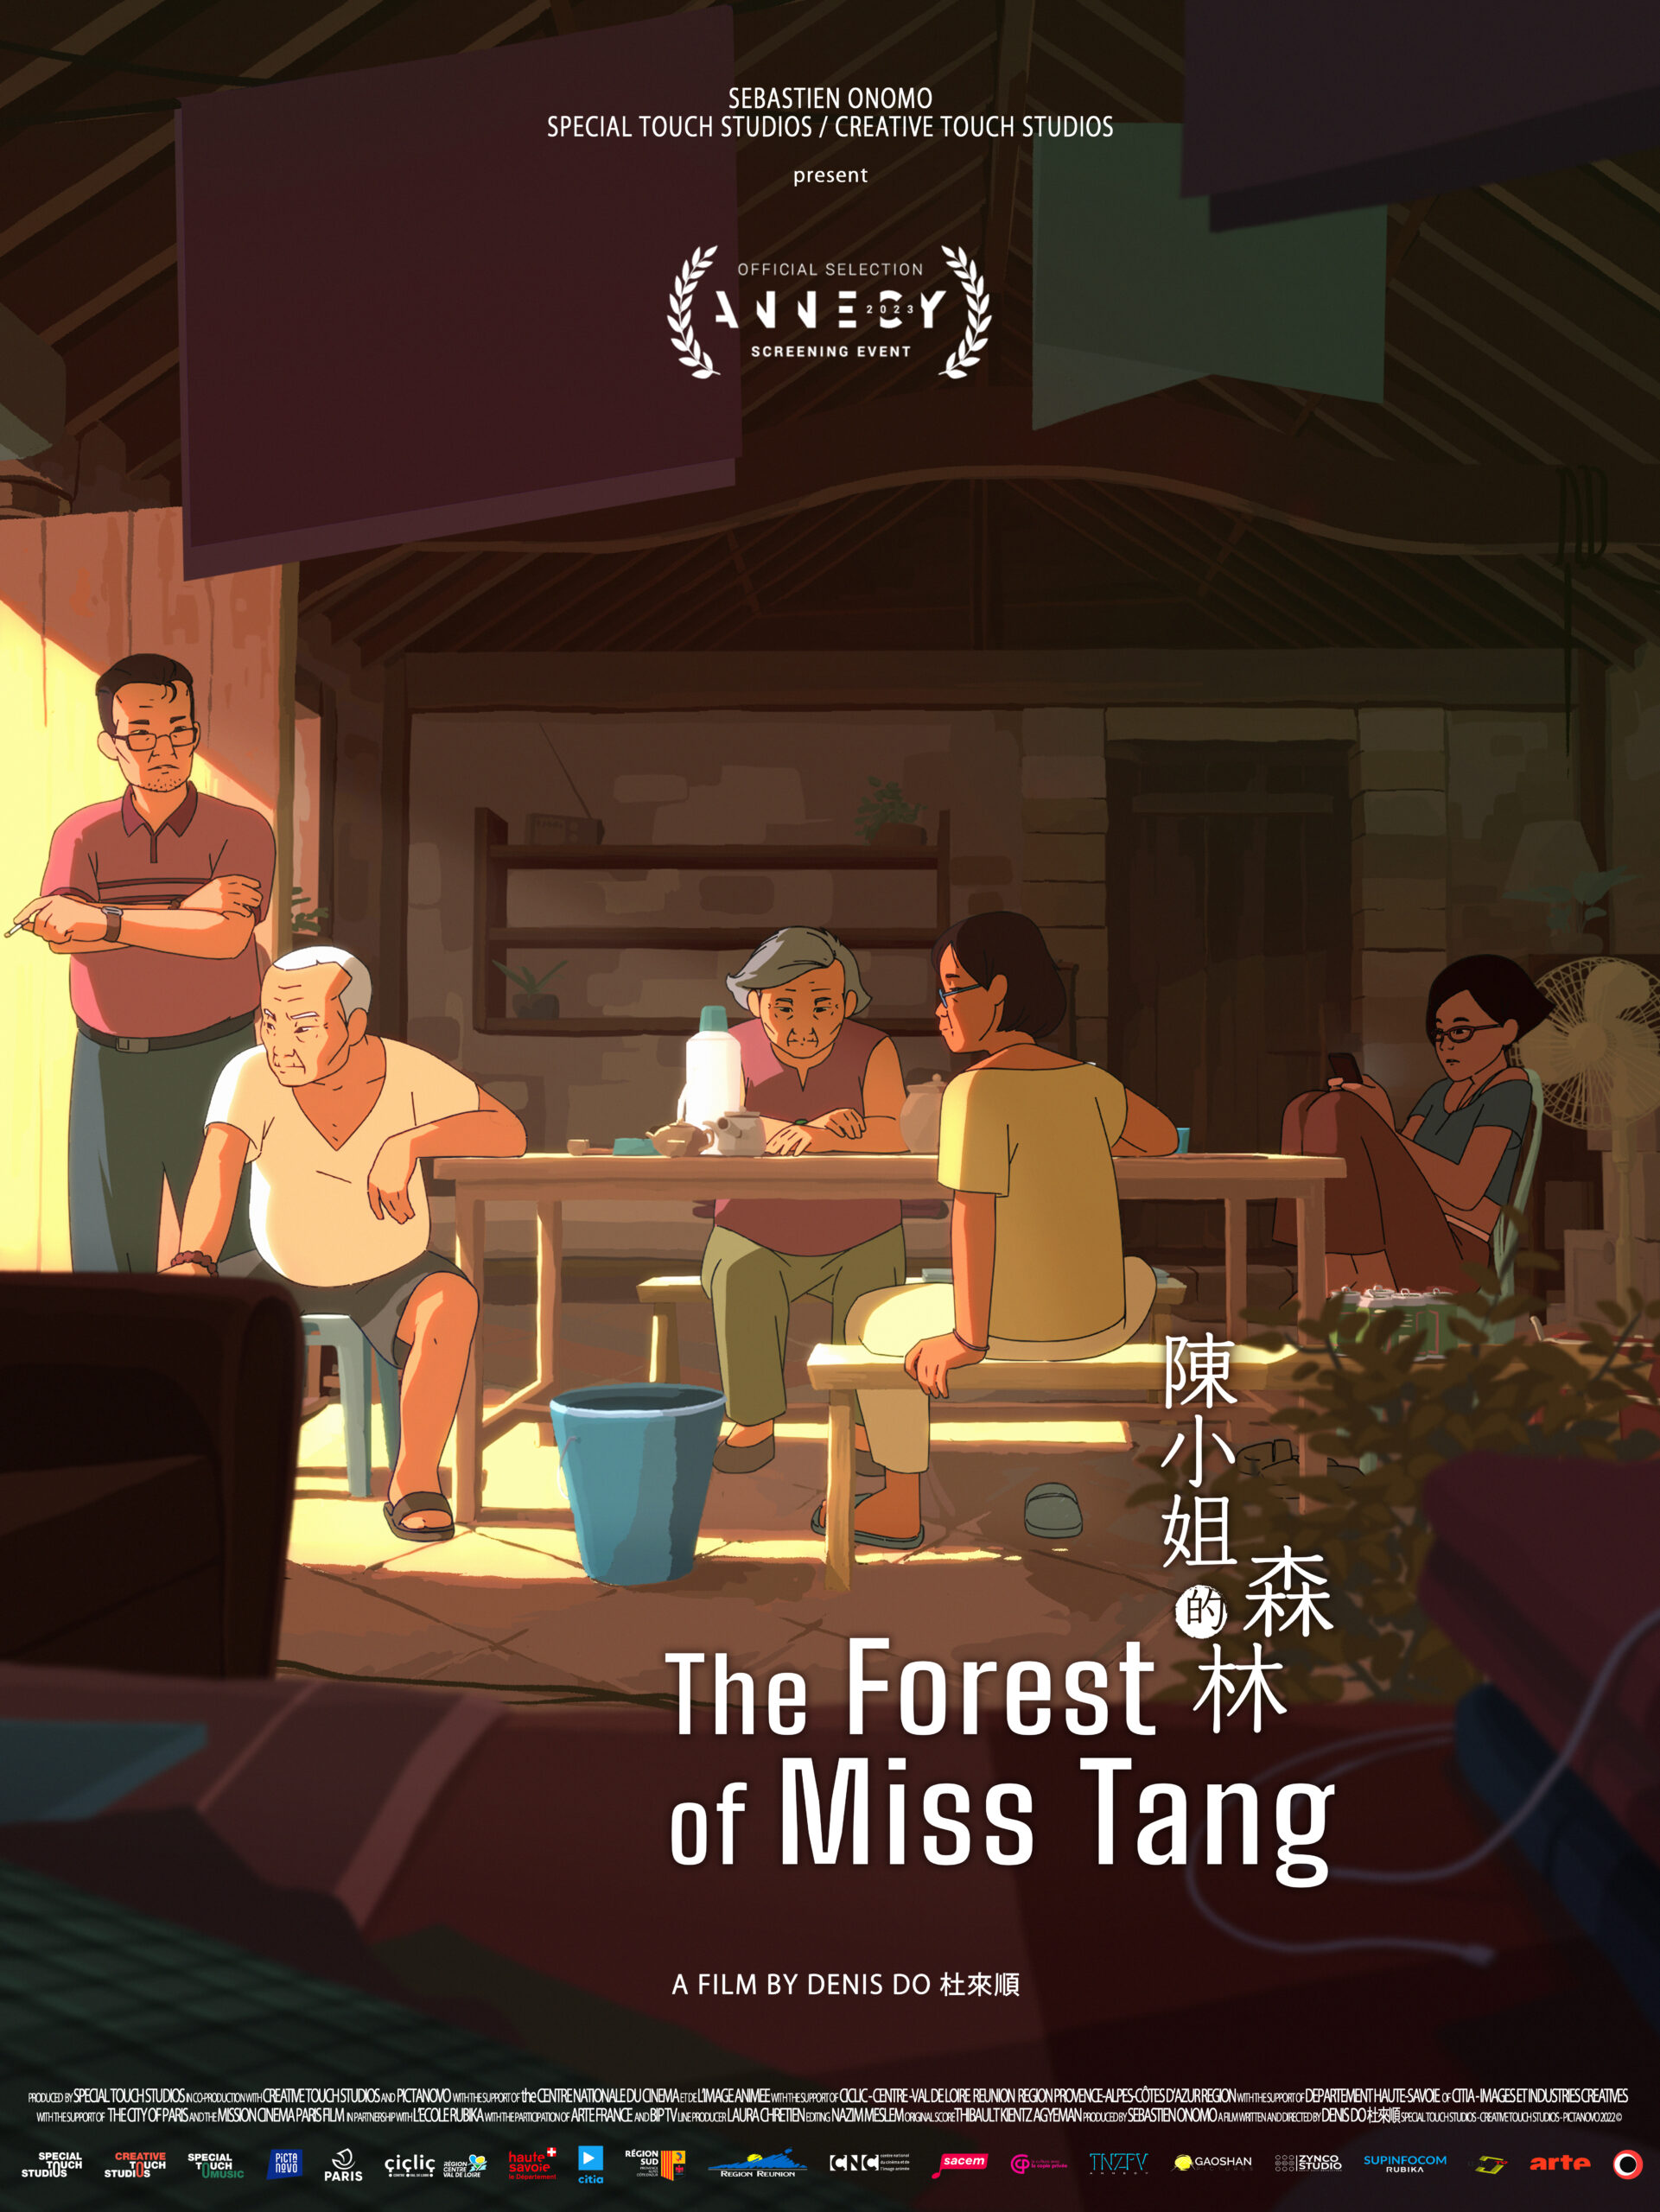 THE FOREST OF MISS TANG